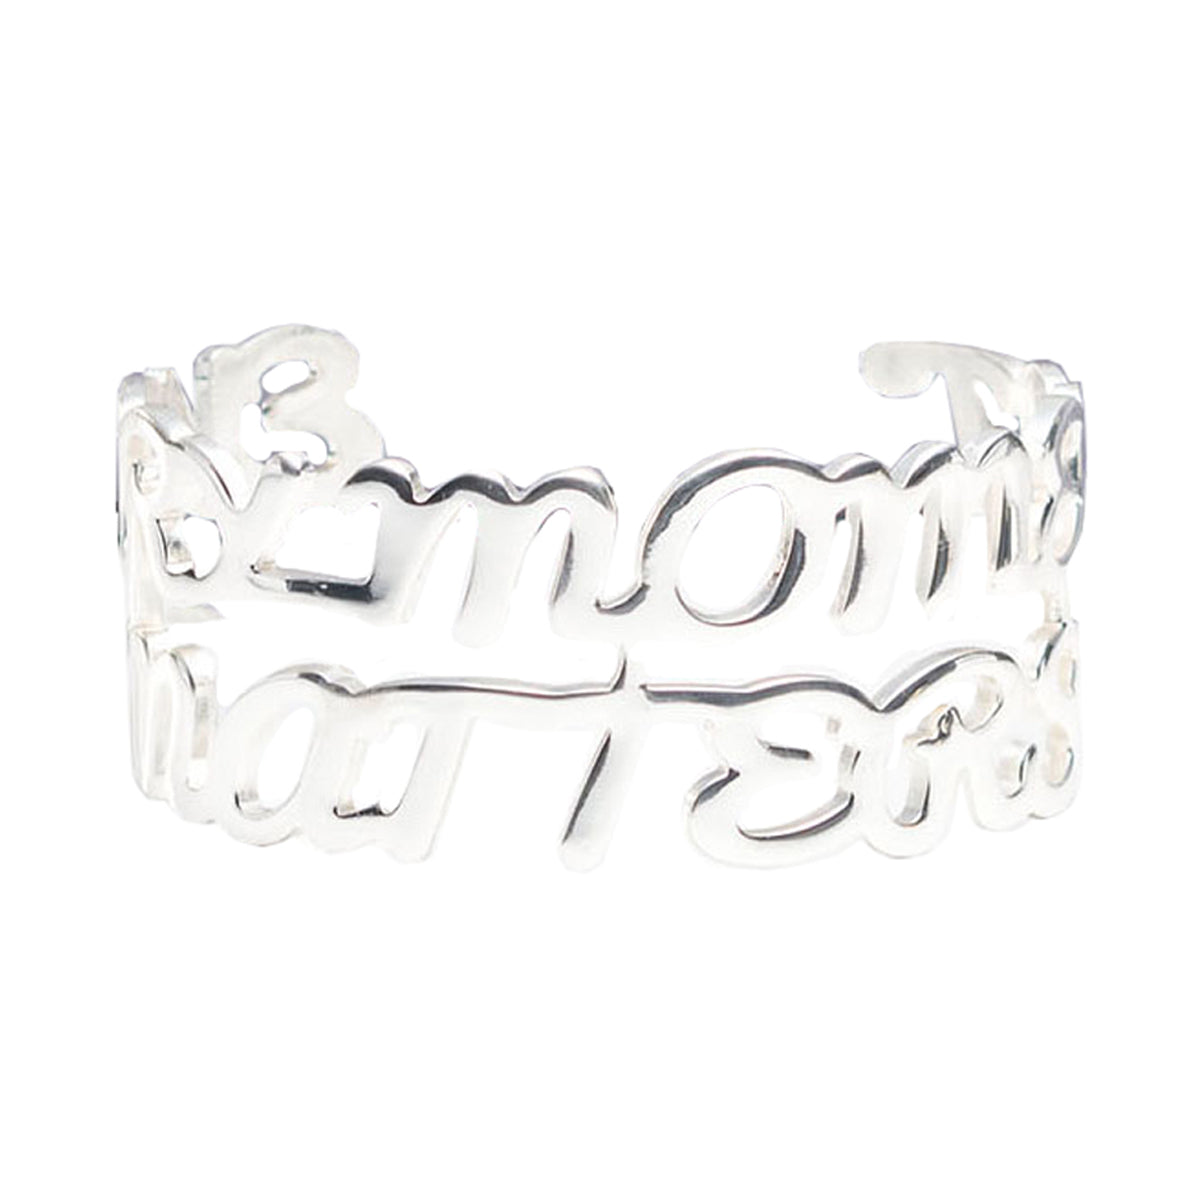 Every Moment Matters Cuff - Silver